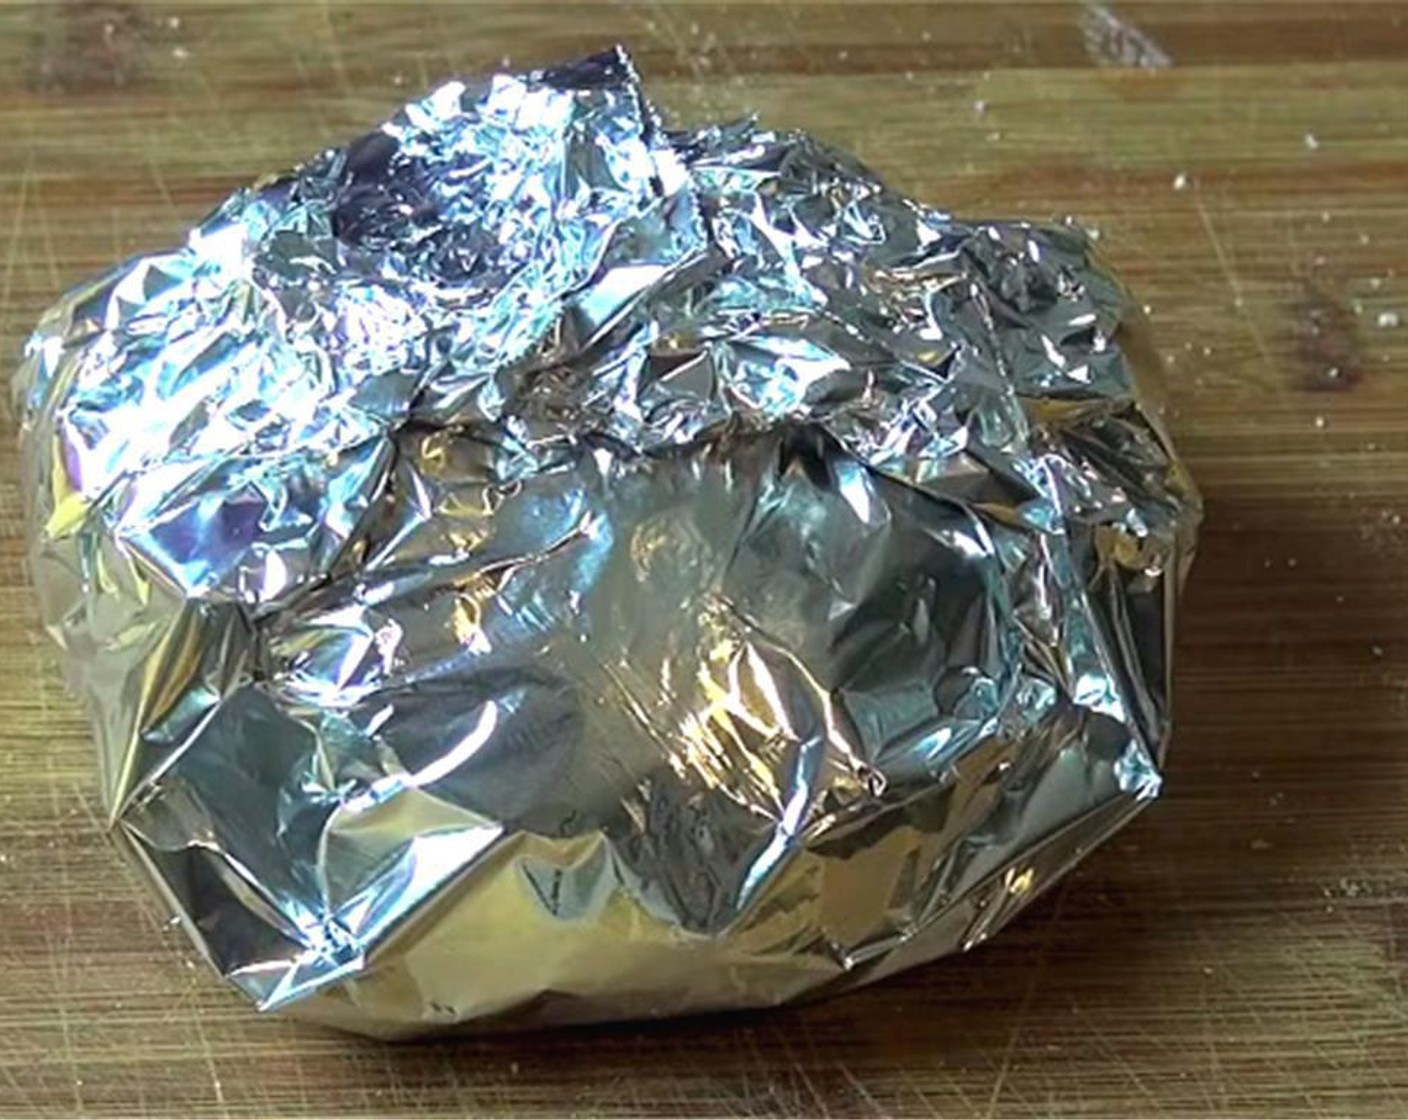 step 5 Wrap the whole bread roll in a little bit of foil. Pop it into a baking tray and bake in preheated oven for about 10 minutes if you want a nicely soft yolk. Bake for 15 to 20 minuts if you prefer the egg to be firmer.